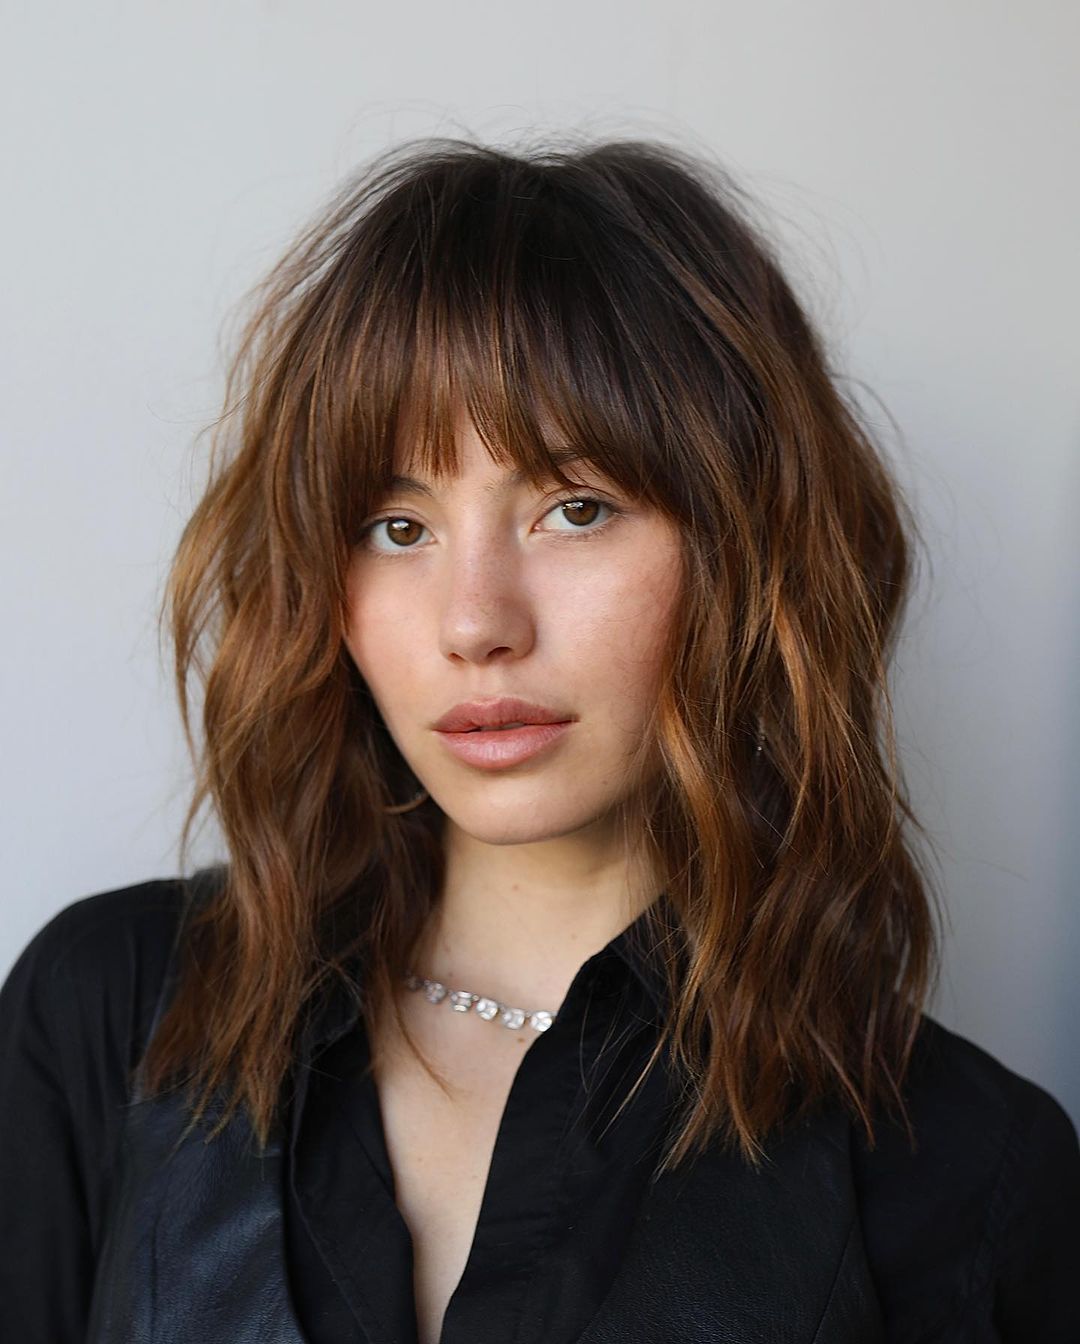 Hairstyle of the Week: Reshaped Mid-Length with Bangs